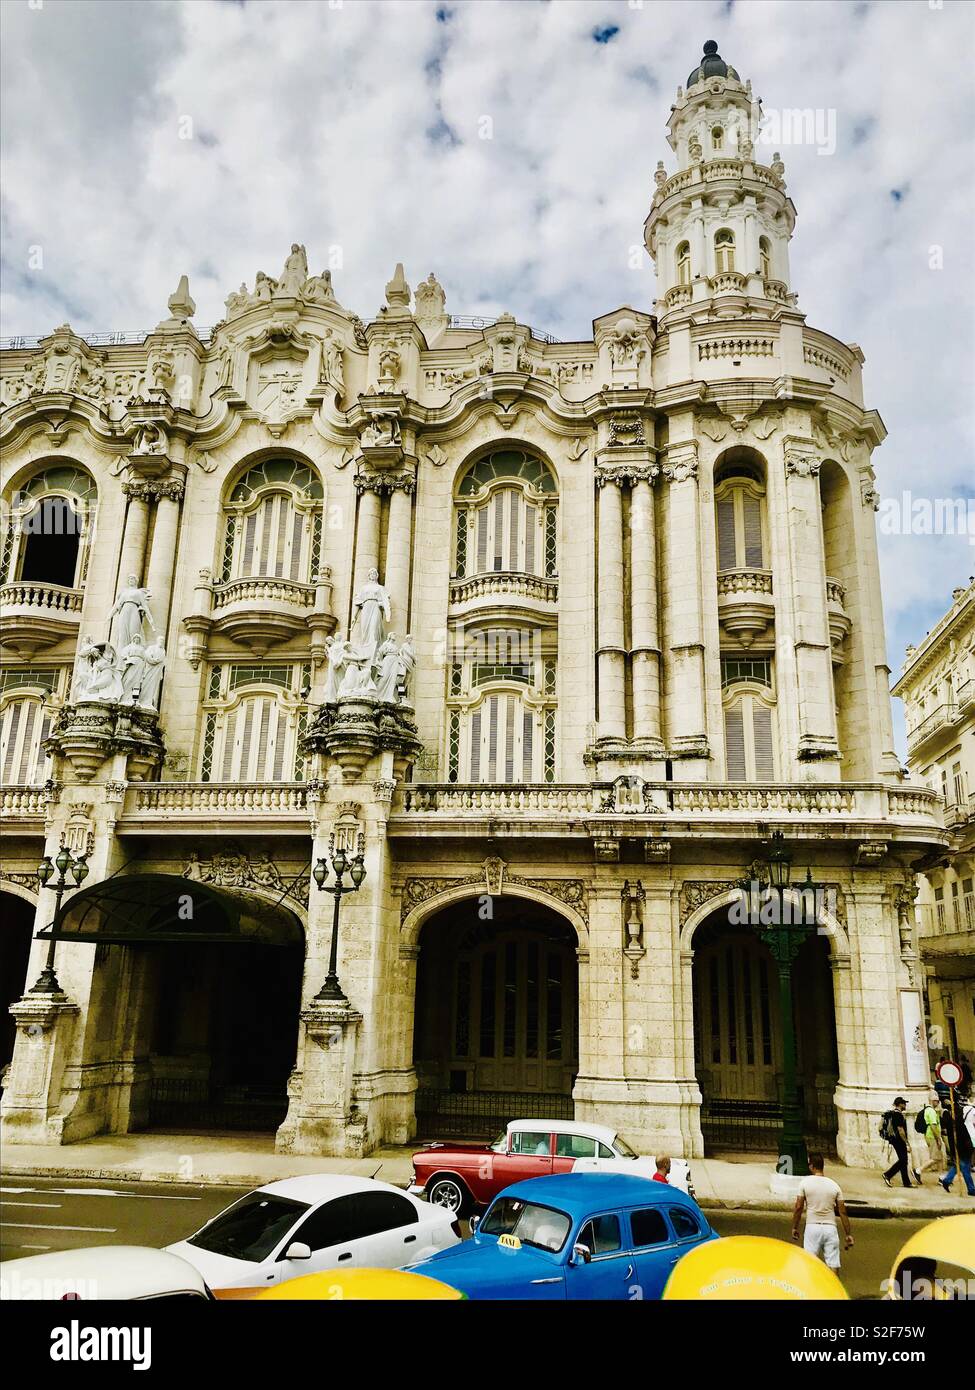 Gran Teatro de La Habana, one of the largest opera houses in the world. Designed by Belgian architect, Paul Belau, the theater faces Parque Central and hosts Cuba’s National ballet and opera. Stock Photo